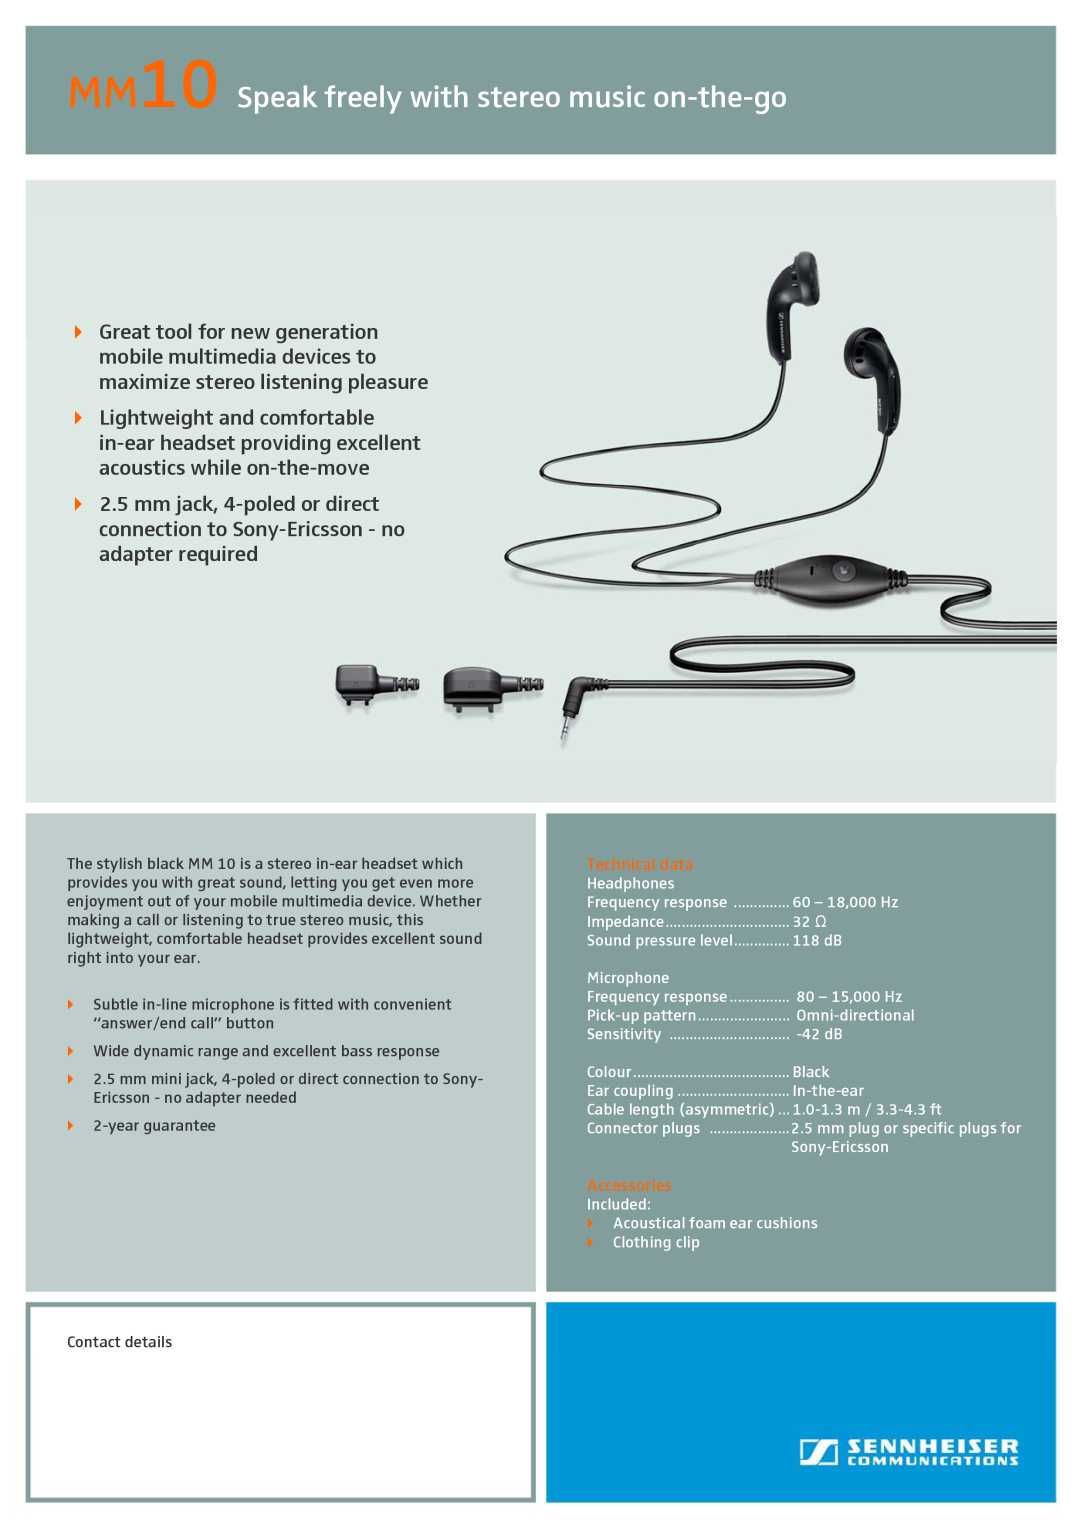 Sennheiser manual MM10 Speak freely with stereo music on-the-go, Technical data, Accessories 